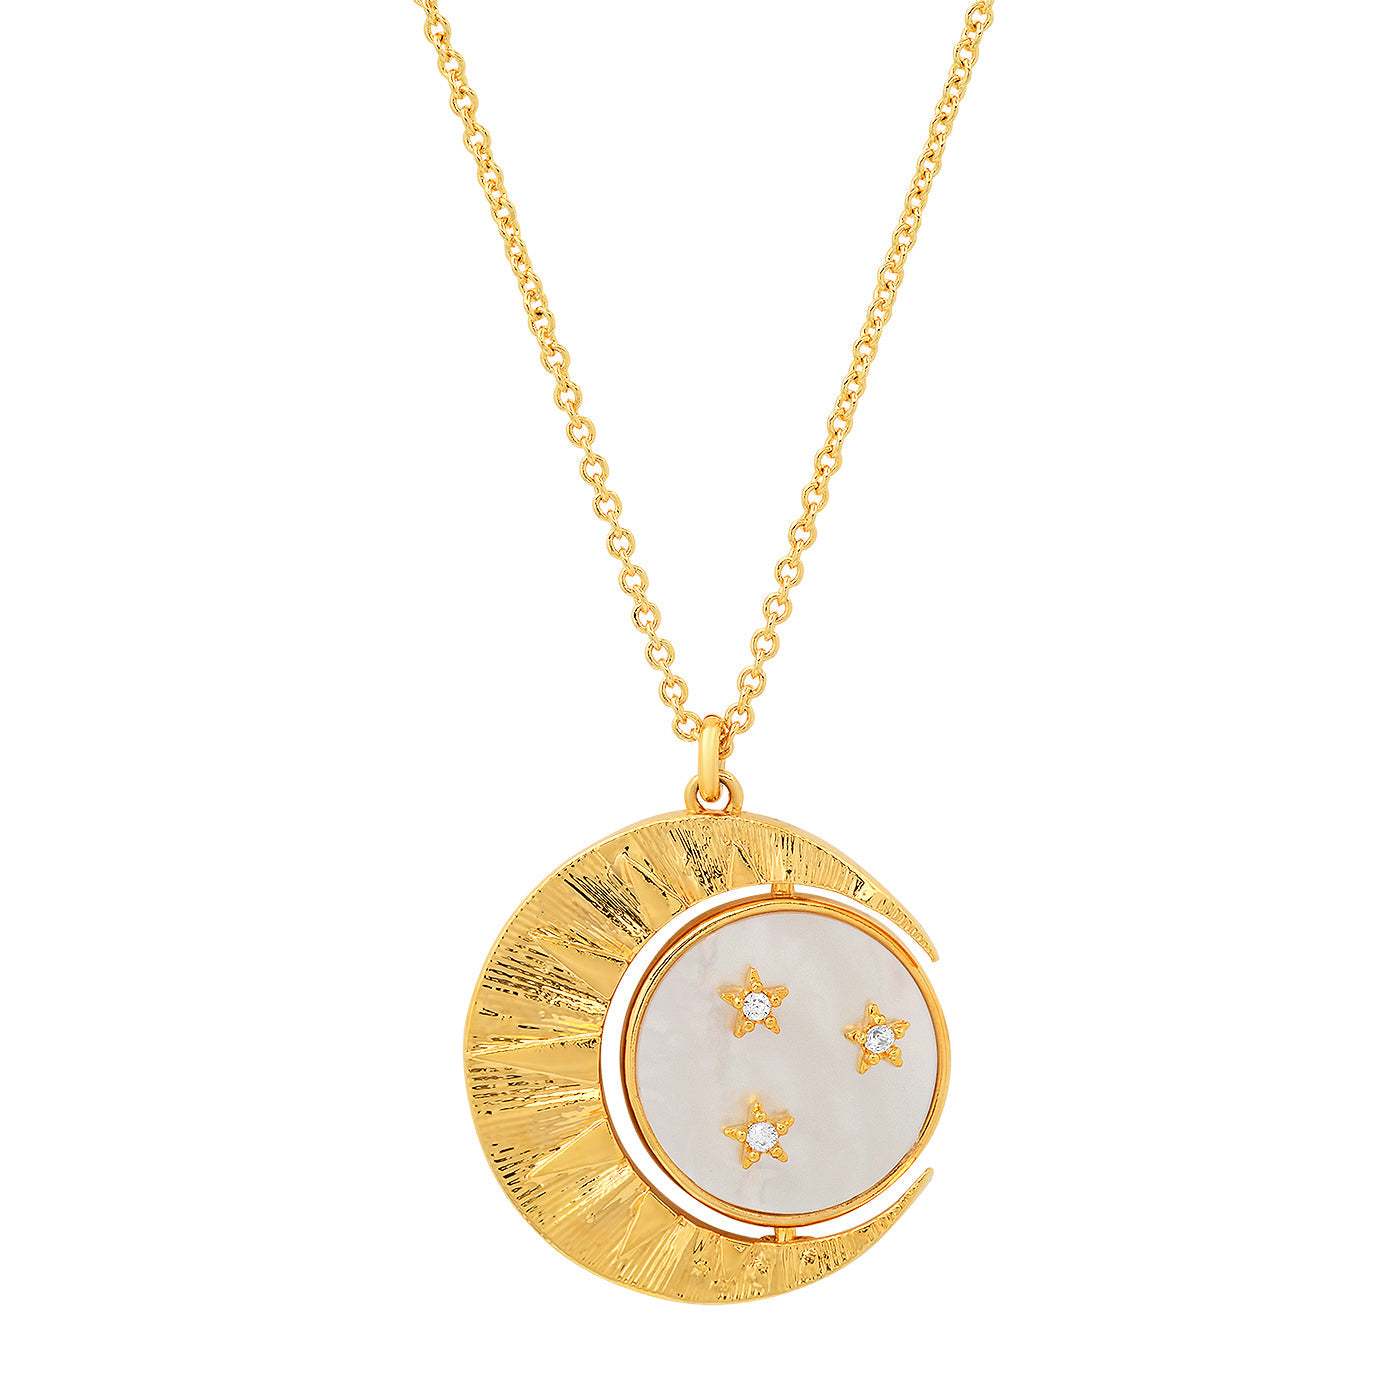 Tai Jewels "Mother Moon" Pendant Necklace